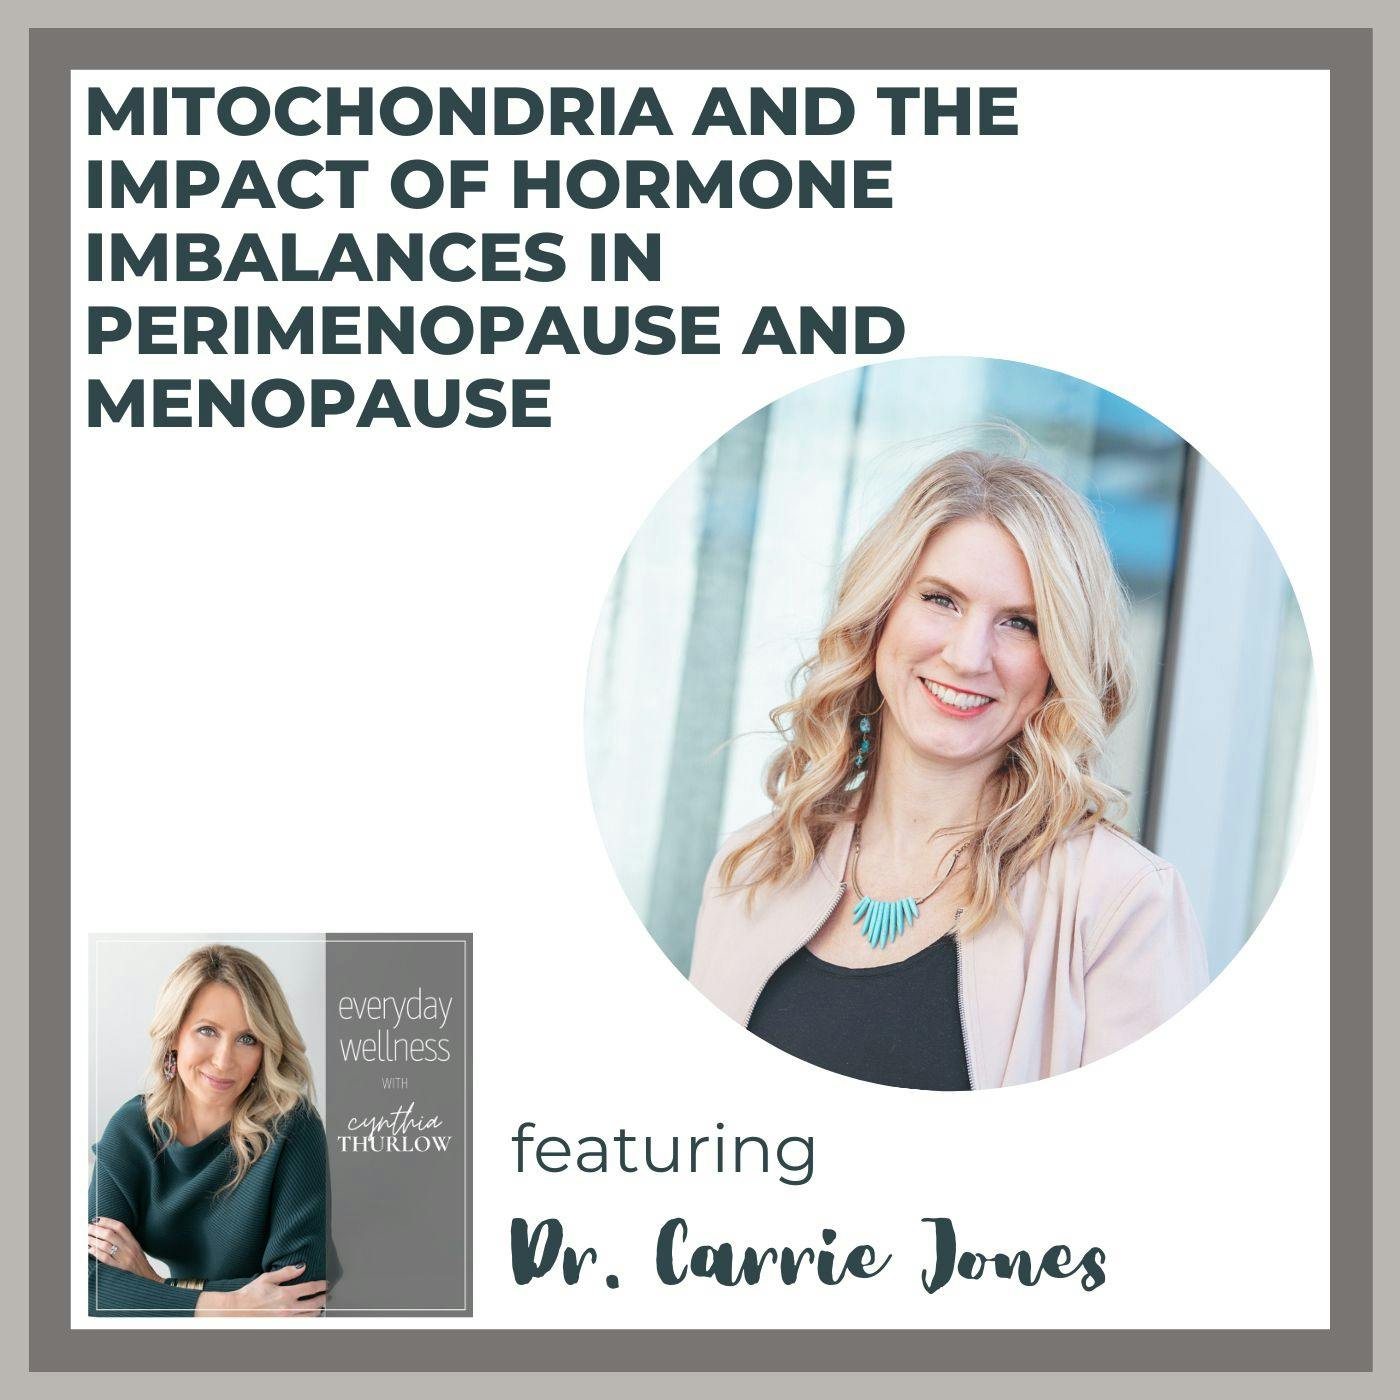 Ep. 241 Mitochondria and the Impact of Hormone Imbalances in Perimenopause and Menopause with Dr. Carrie Jones